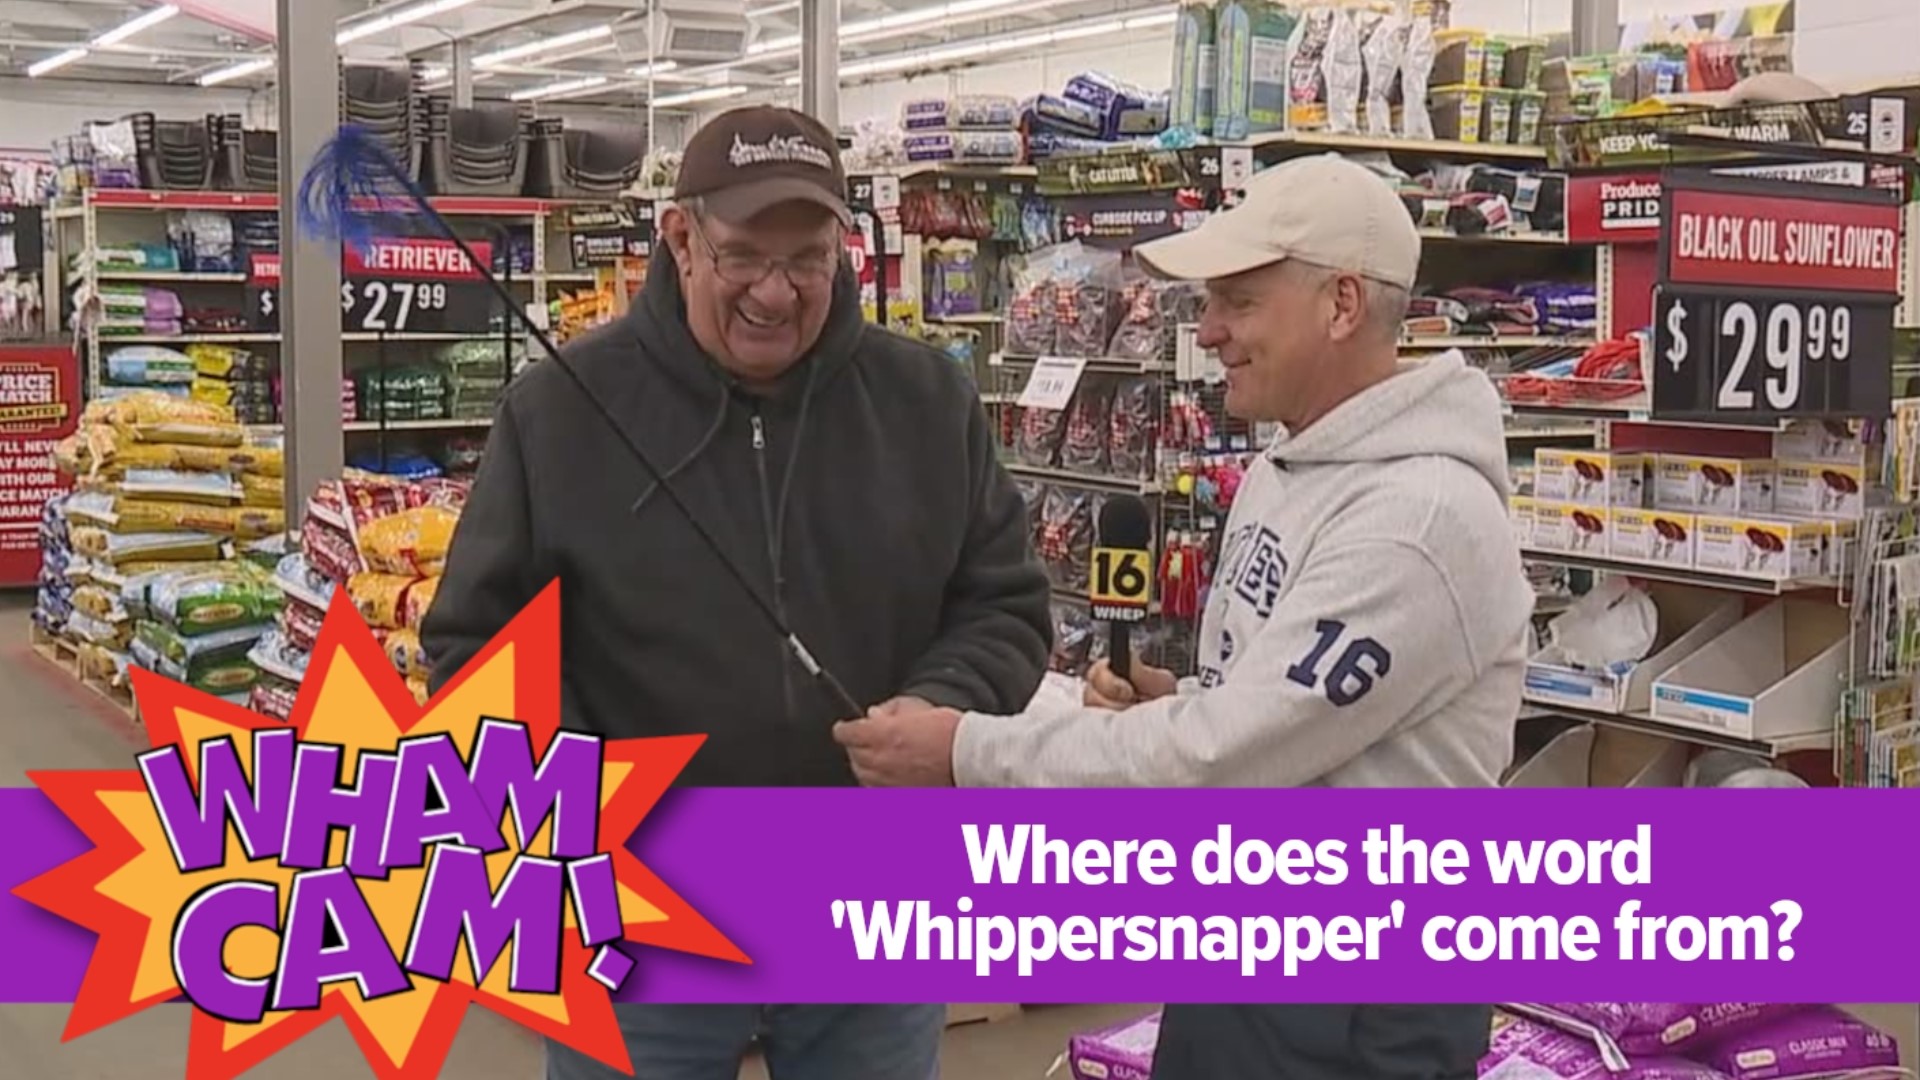 Ever wonder why sometimes young people are called a whippersnapper? As always, Joe Snedeker has the answer in this week's Wham Cam.